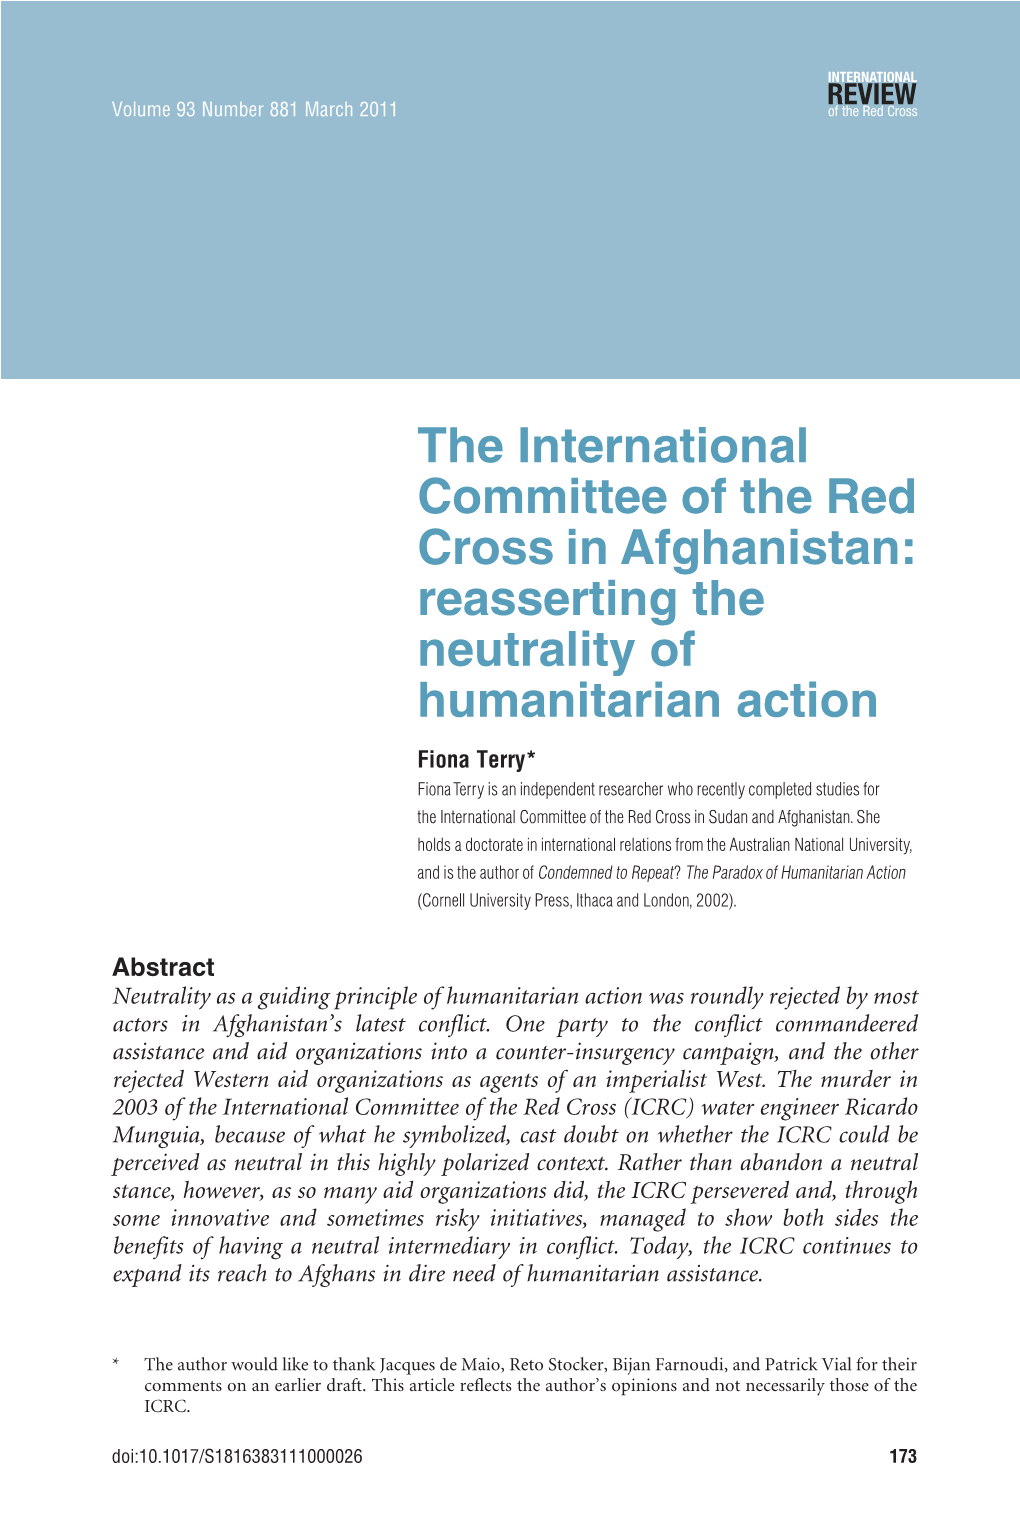 The ICRC in Afghanistan: Reasserting the Neutrality of Humanitarian Action